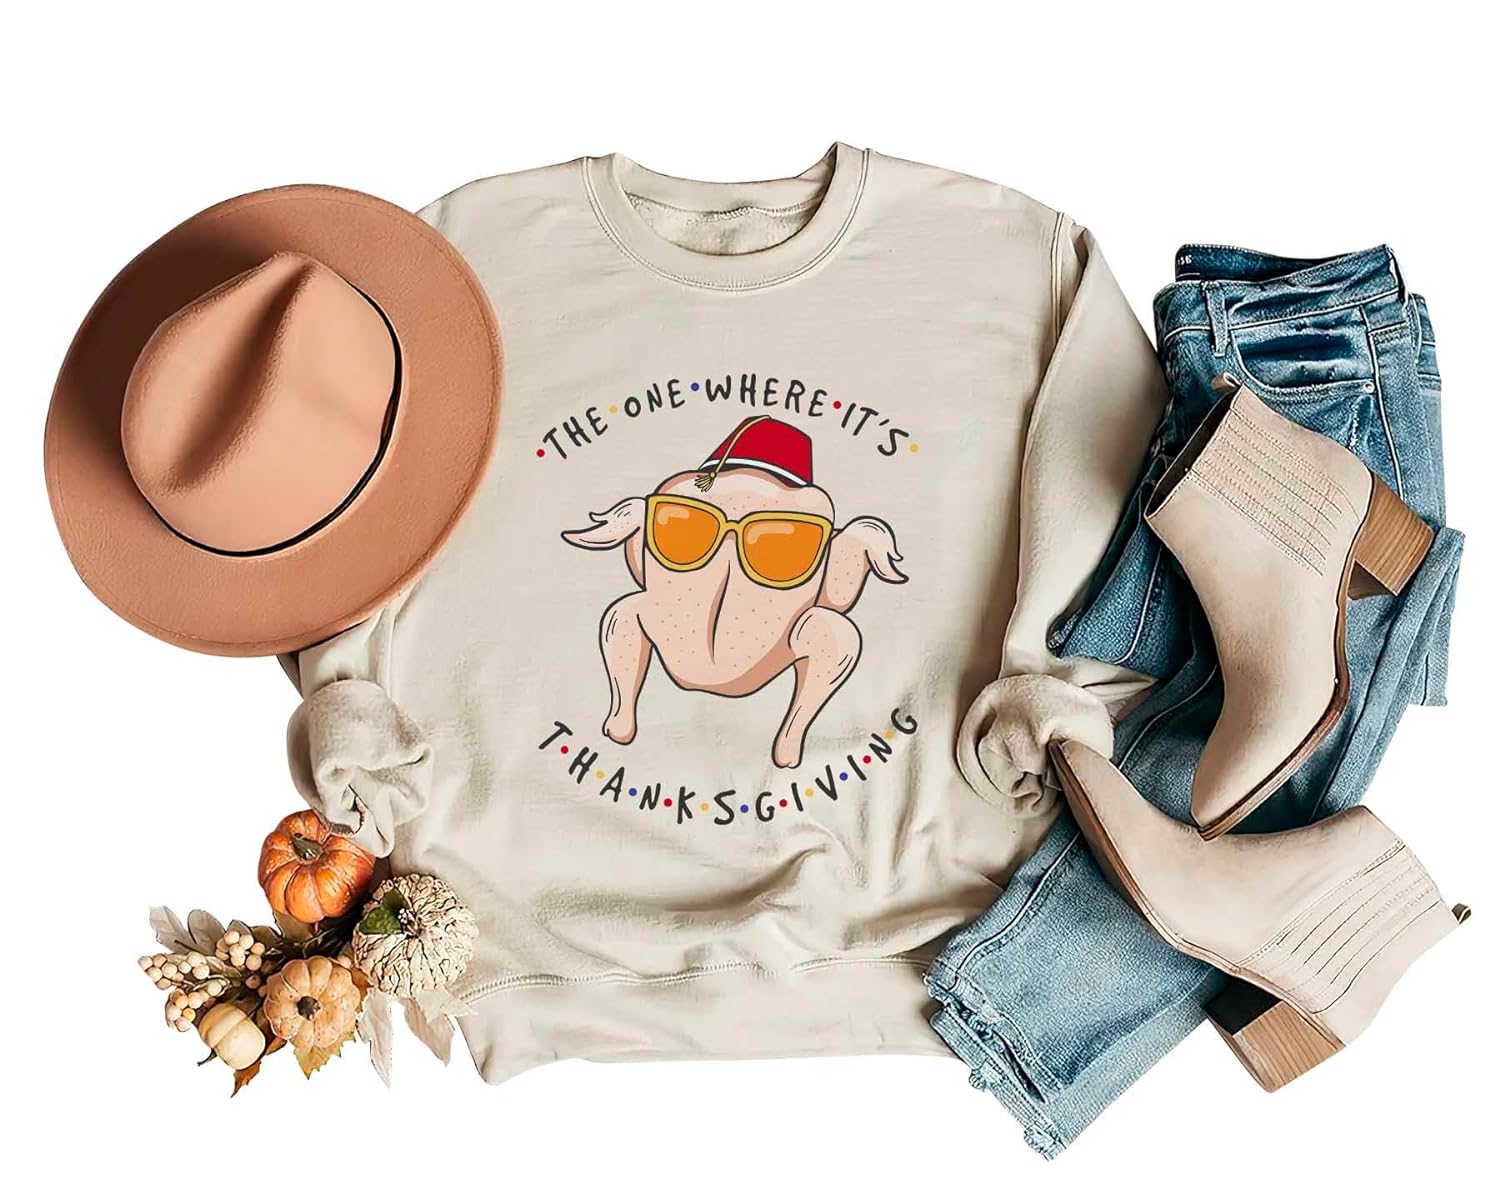 The One Where It Is Thanksgiving, Turkey Head Sweatshirts, Thanksgiving Turkey Head Meme Shirt, Funny Turkey Head Shirts, Thanksgiving Sweatshirts, Friendsgiving Shirts